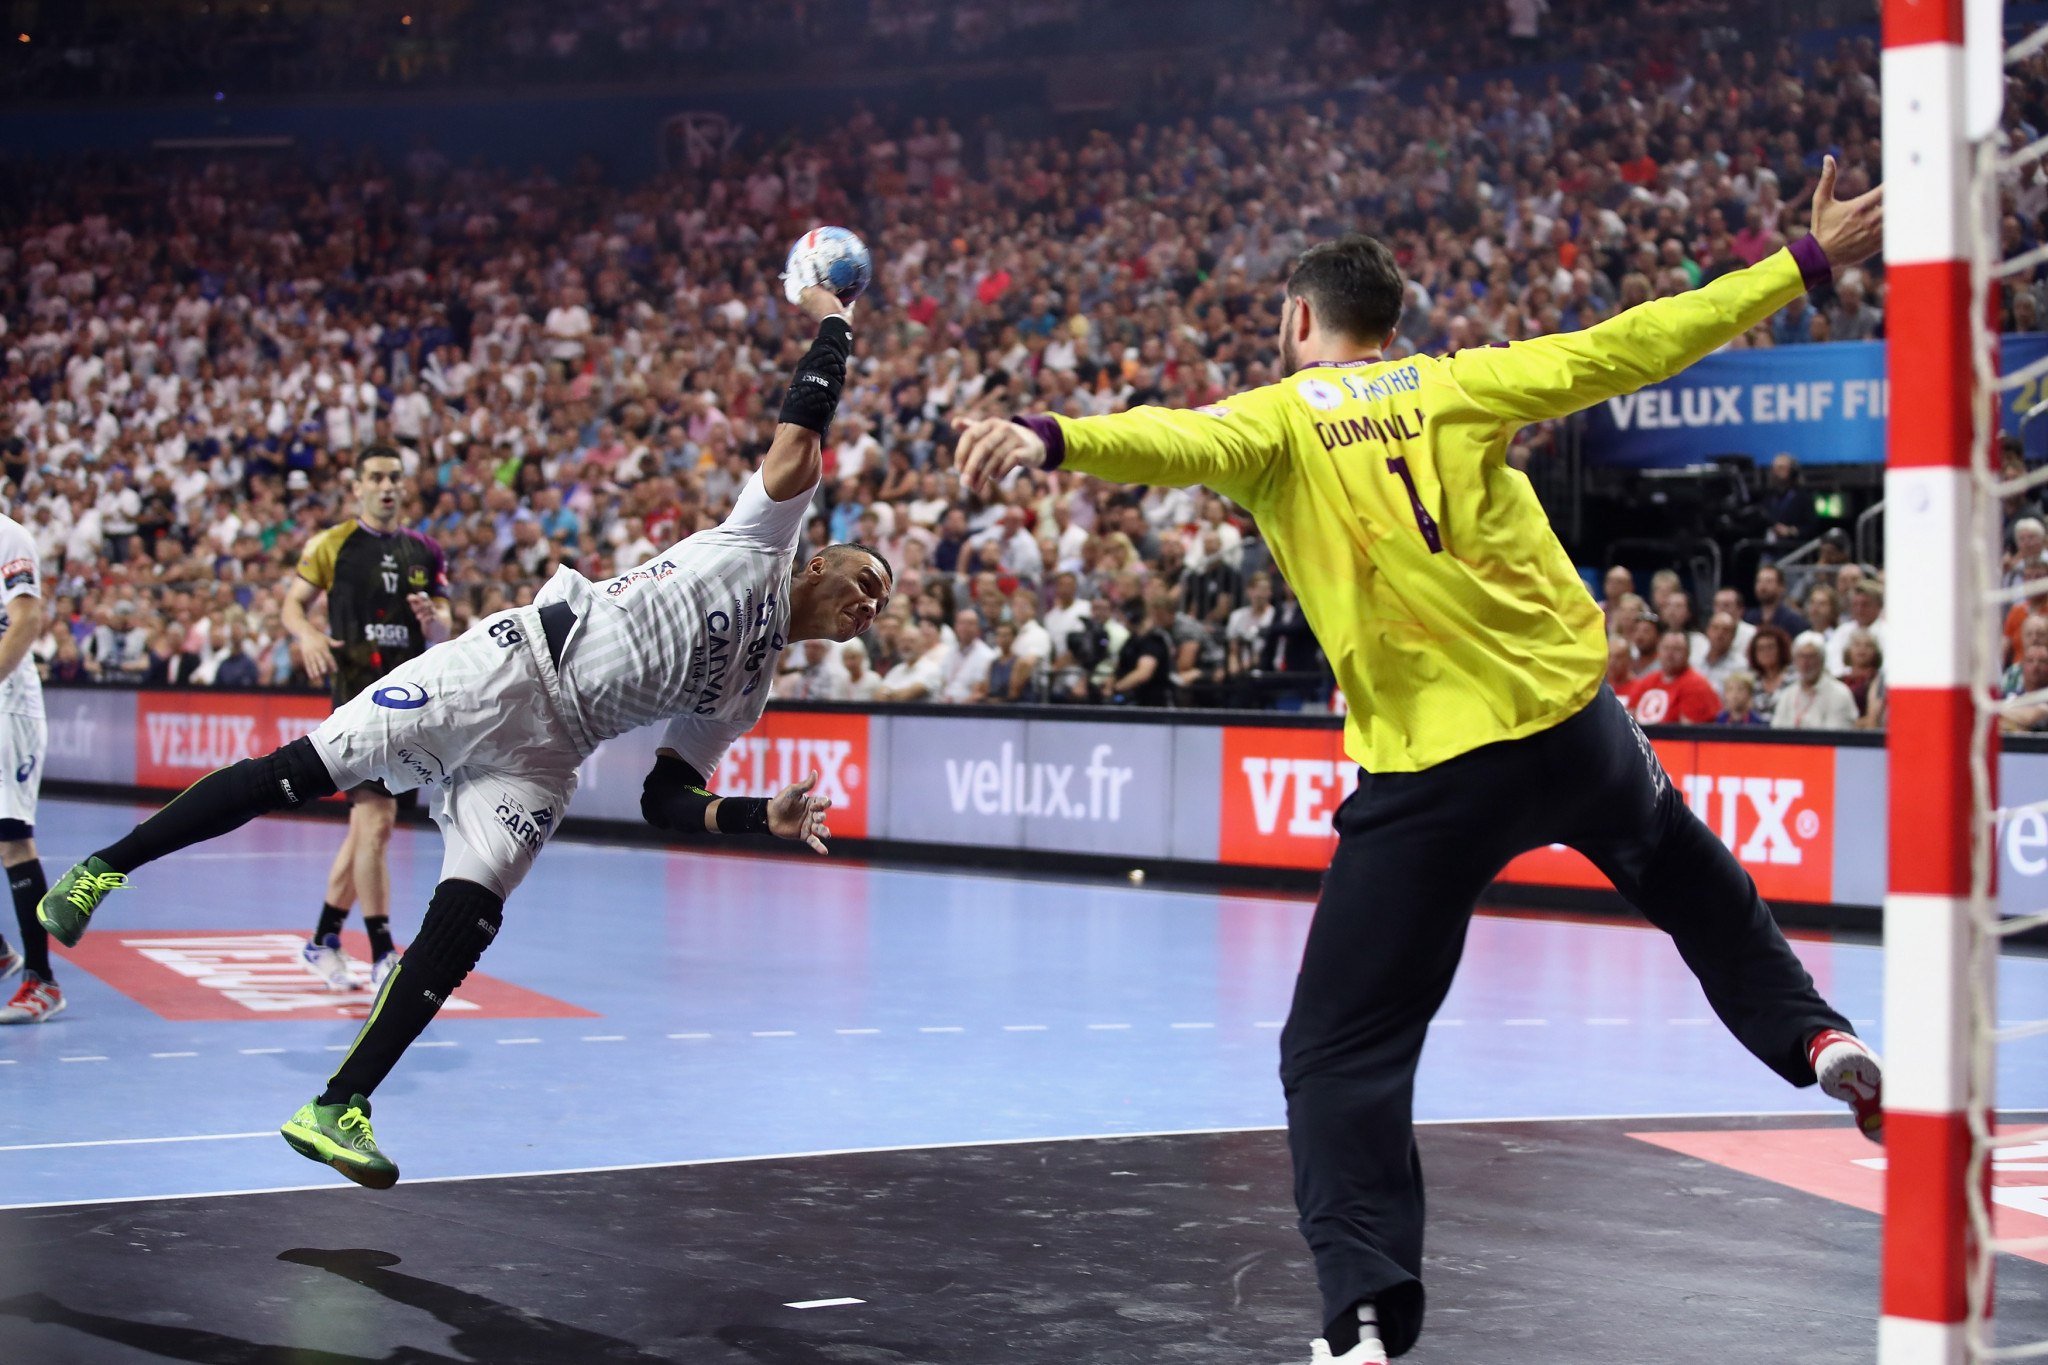 Sixteen teams will compete in the men's EHF Champions League from the 2020/2021 season rather than the current twenty four teams ©Getty Images